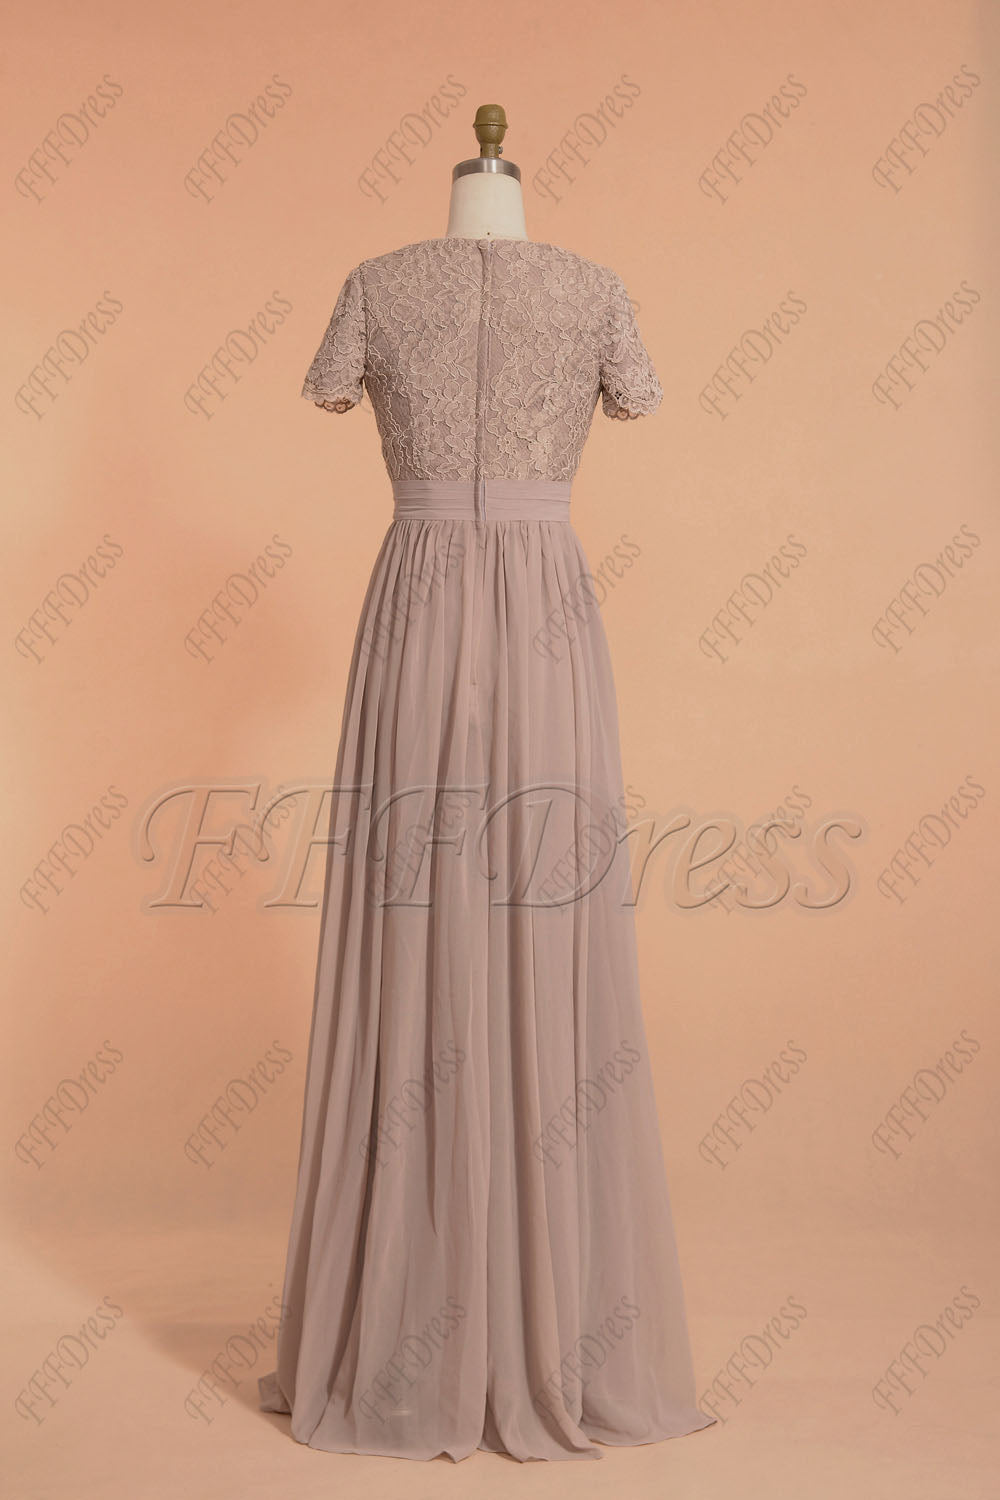 Modest rose mauve bridesmaid dresses with short sleeves